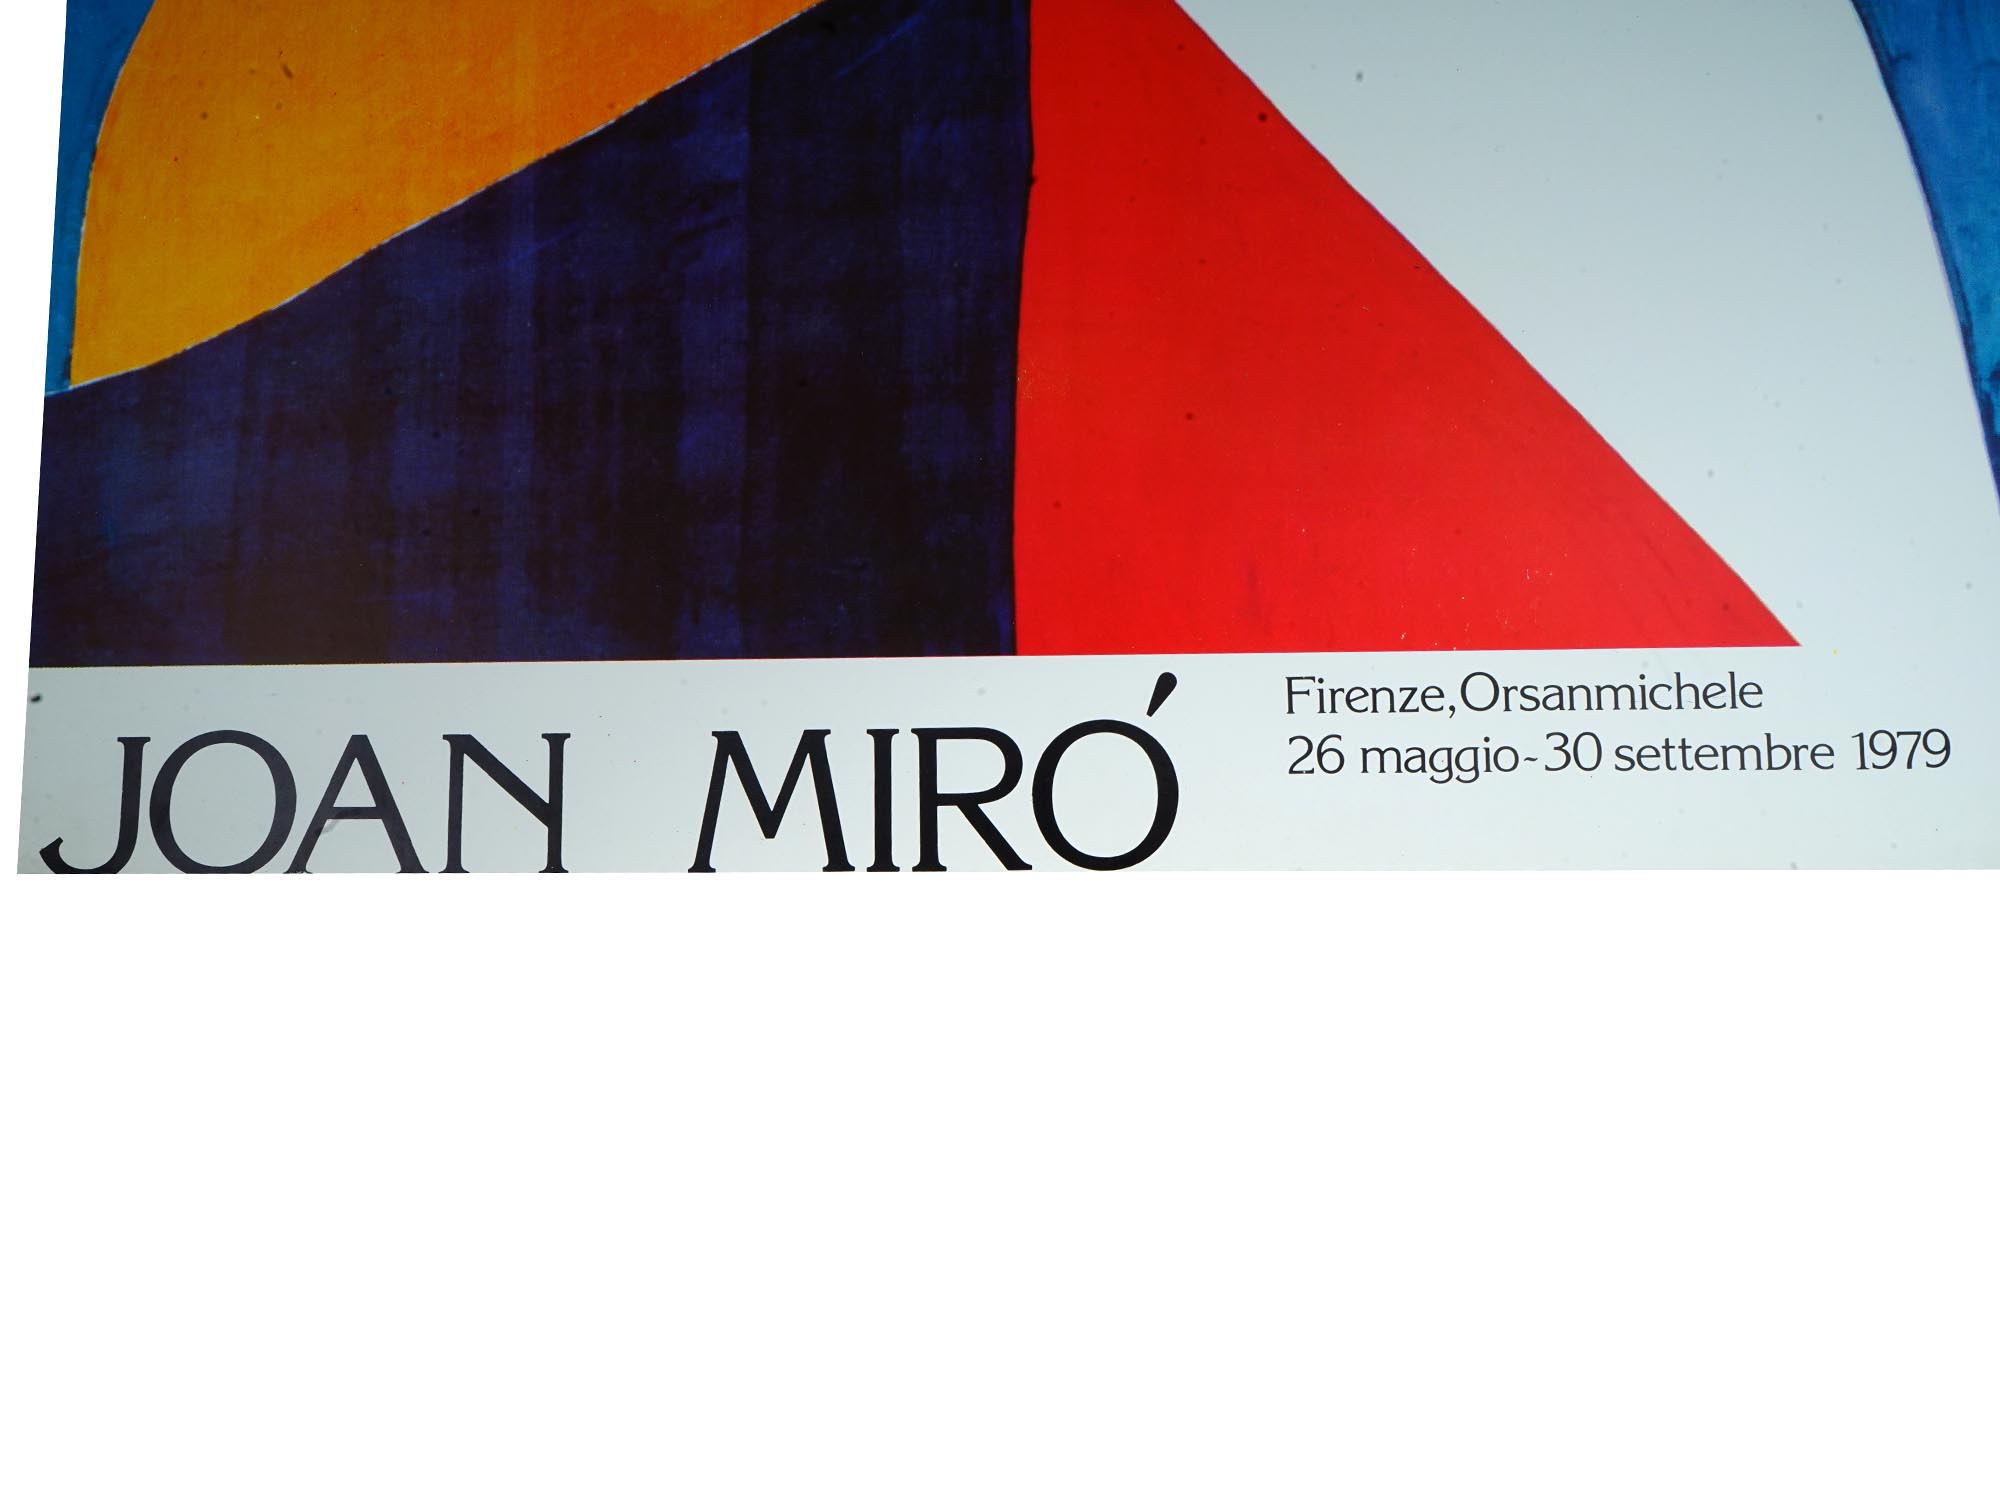 1979 ORSANMICHELE EXHIBITION POSTER BY JOAN MIRO PIC-2